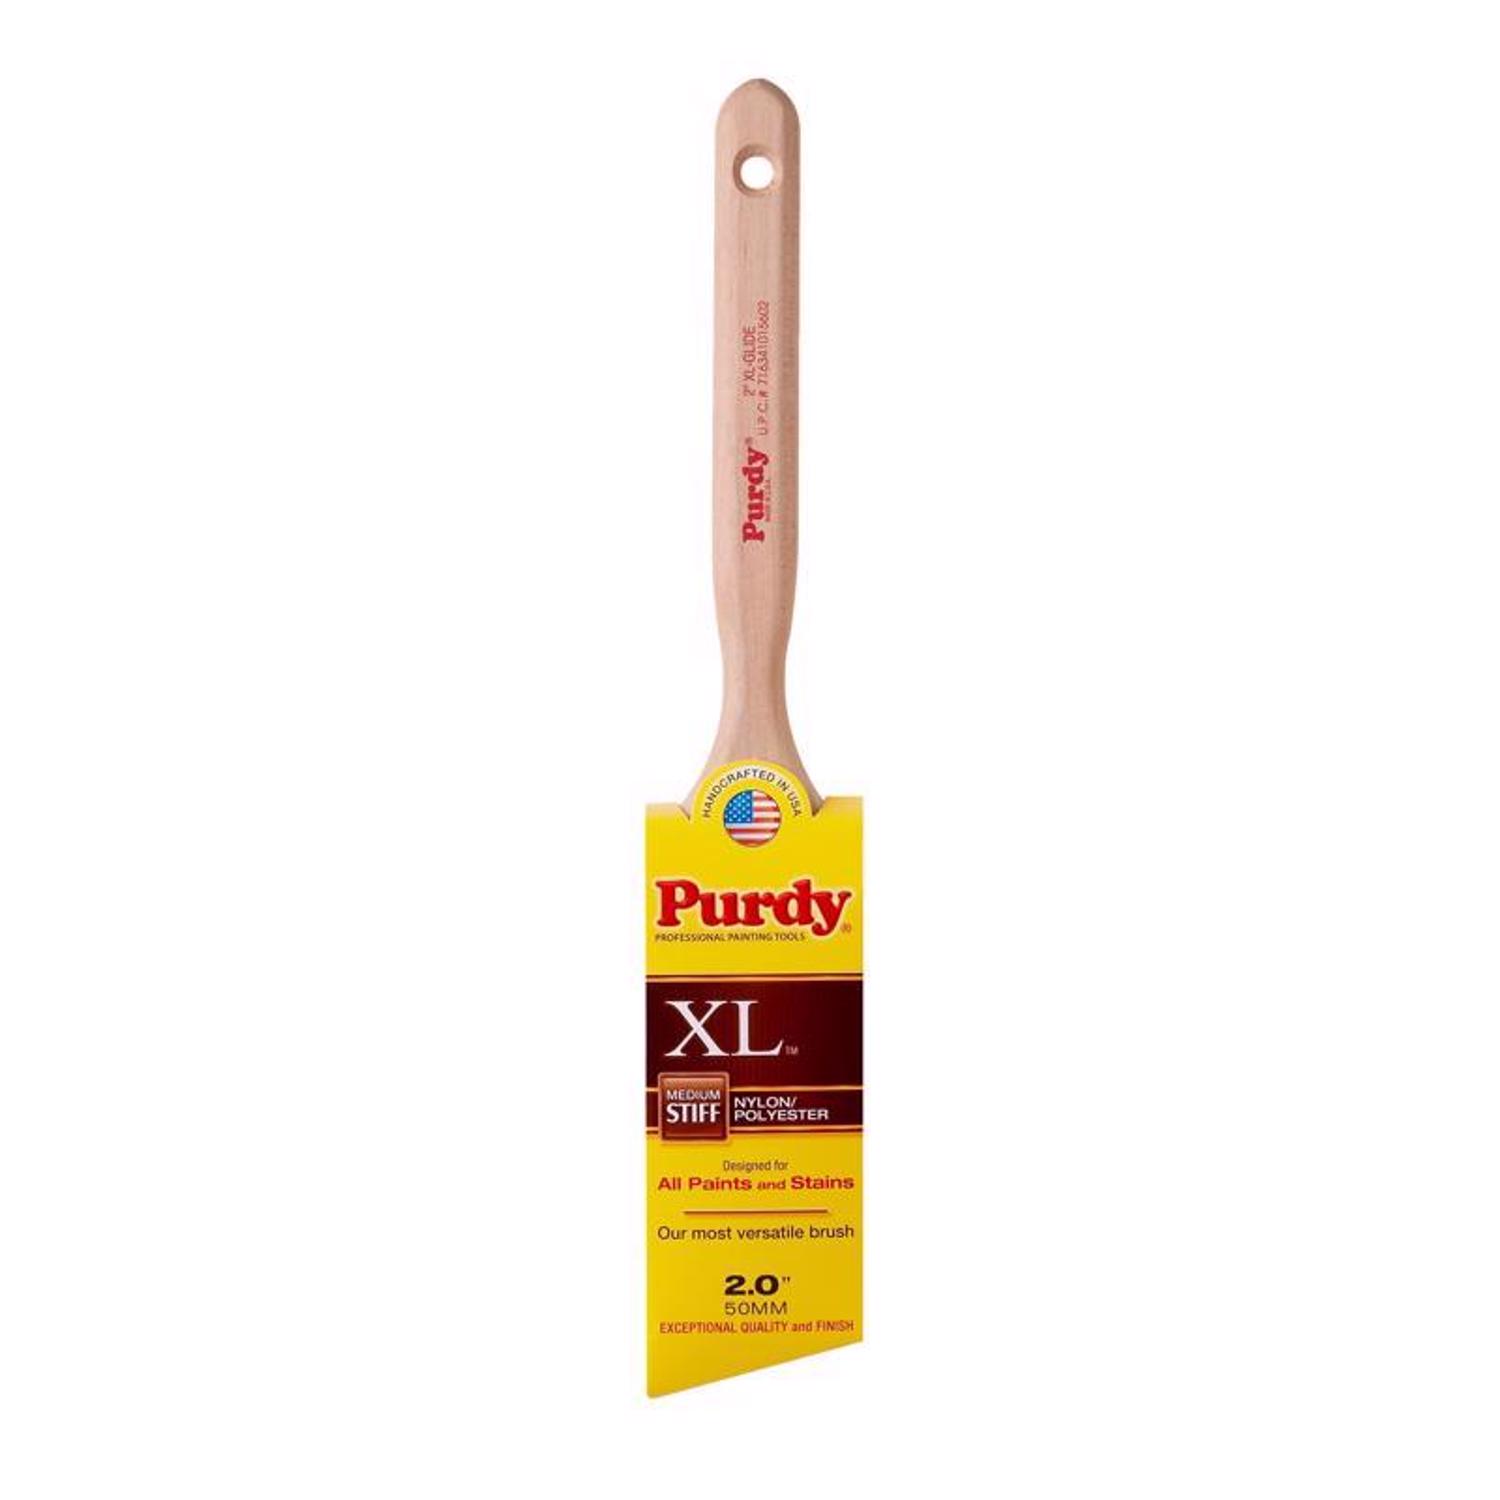 Photos - Putty Knife / Painting Tool Purdy XL Glide 2 in. Medium Stiff Angle Trim Paint Brush 144152320